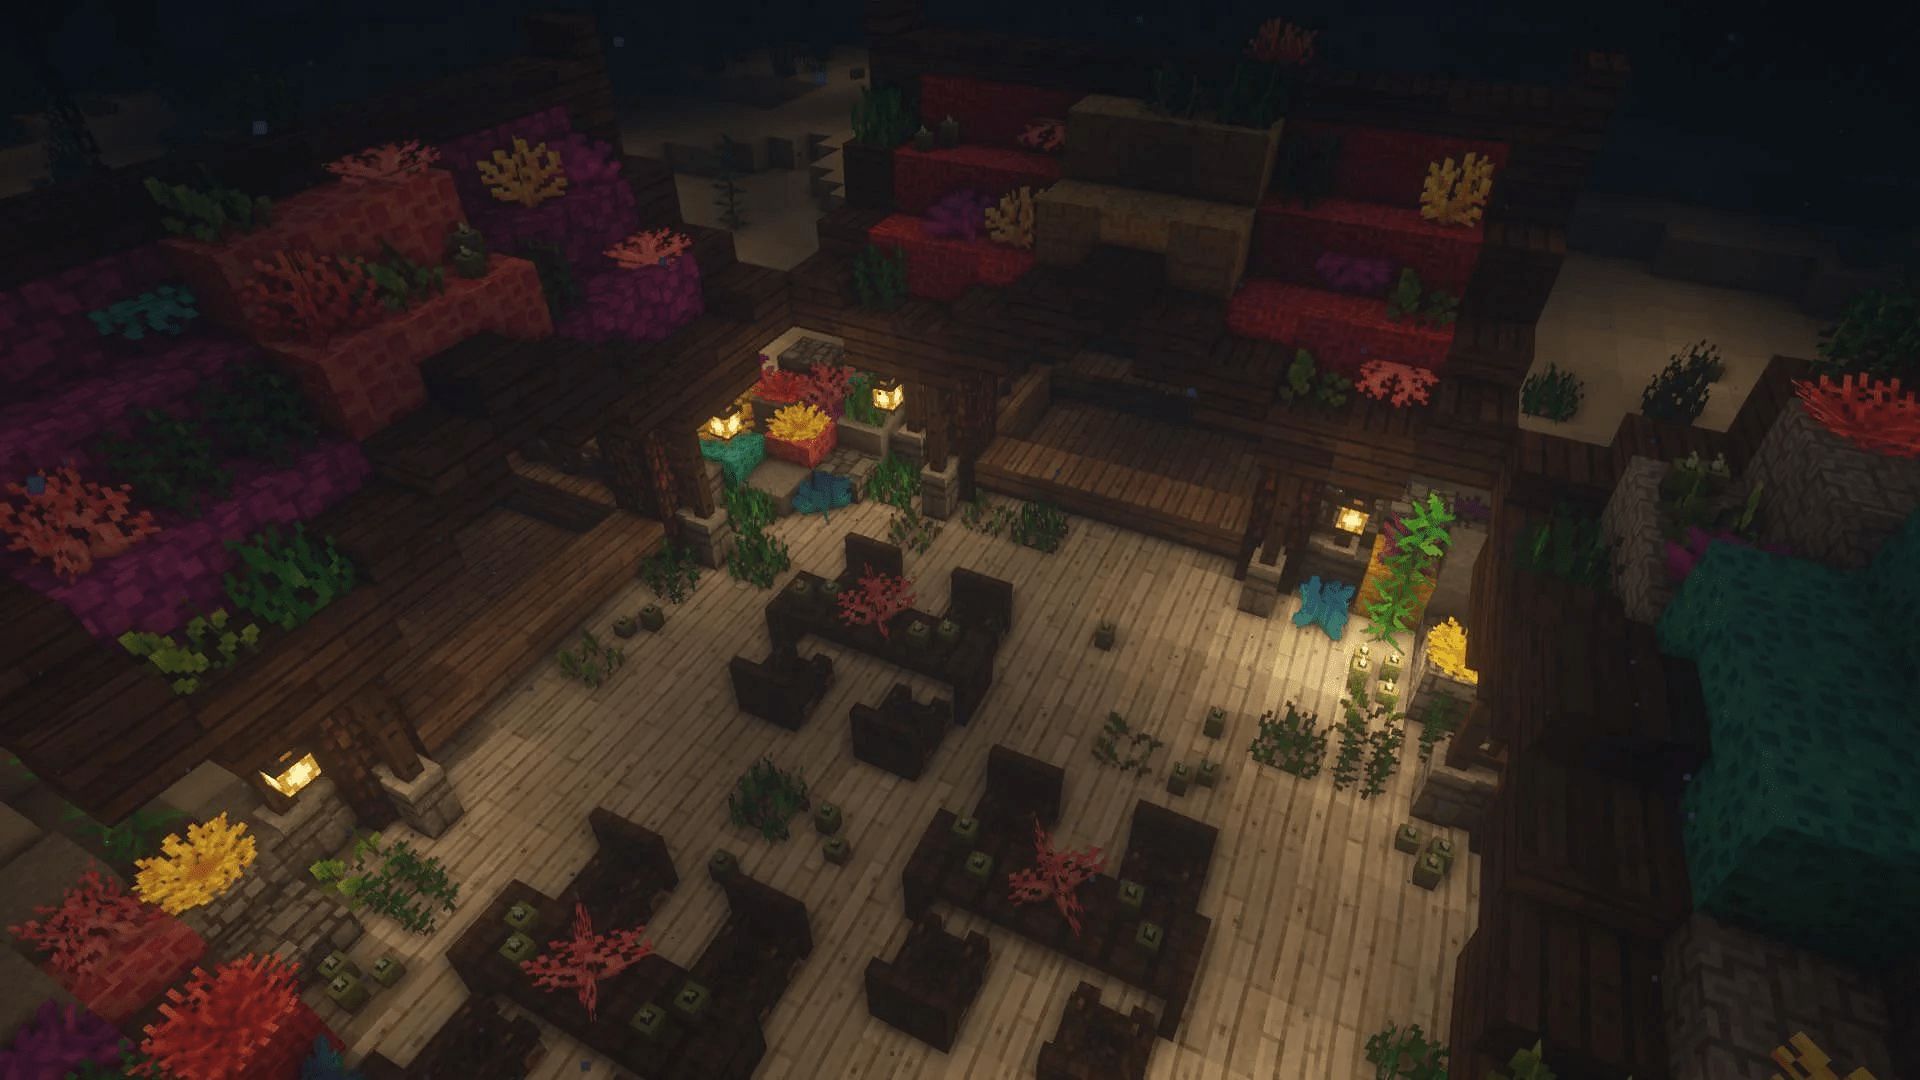 Players can mingle and shop in this underwater market (Image via Admirable-Taste-9454/Reddit)